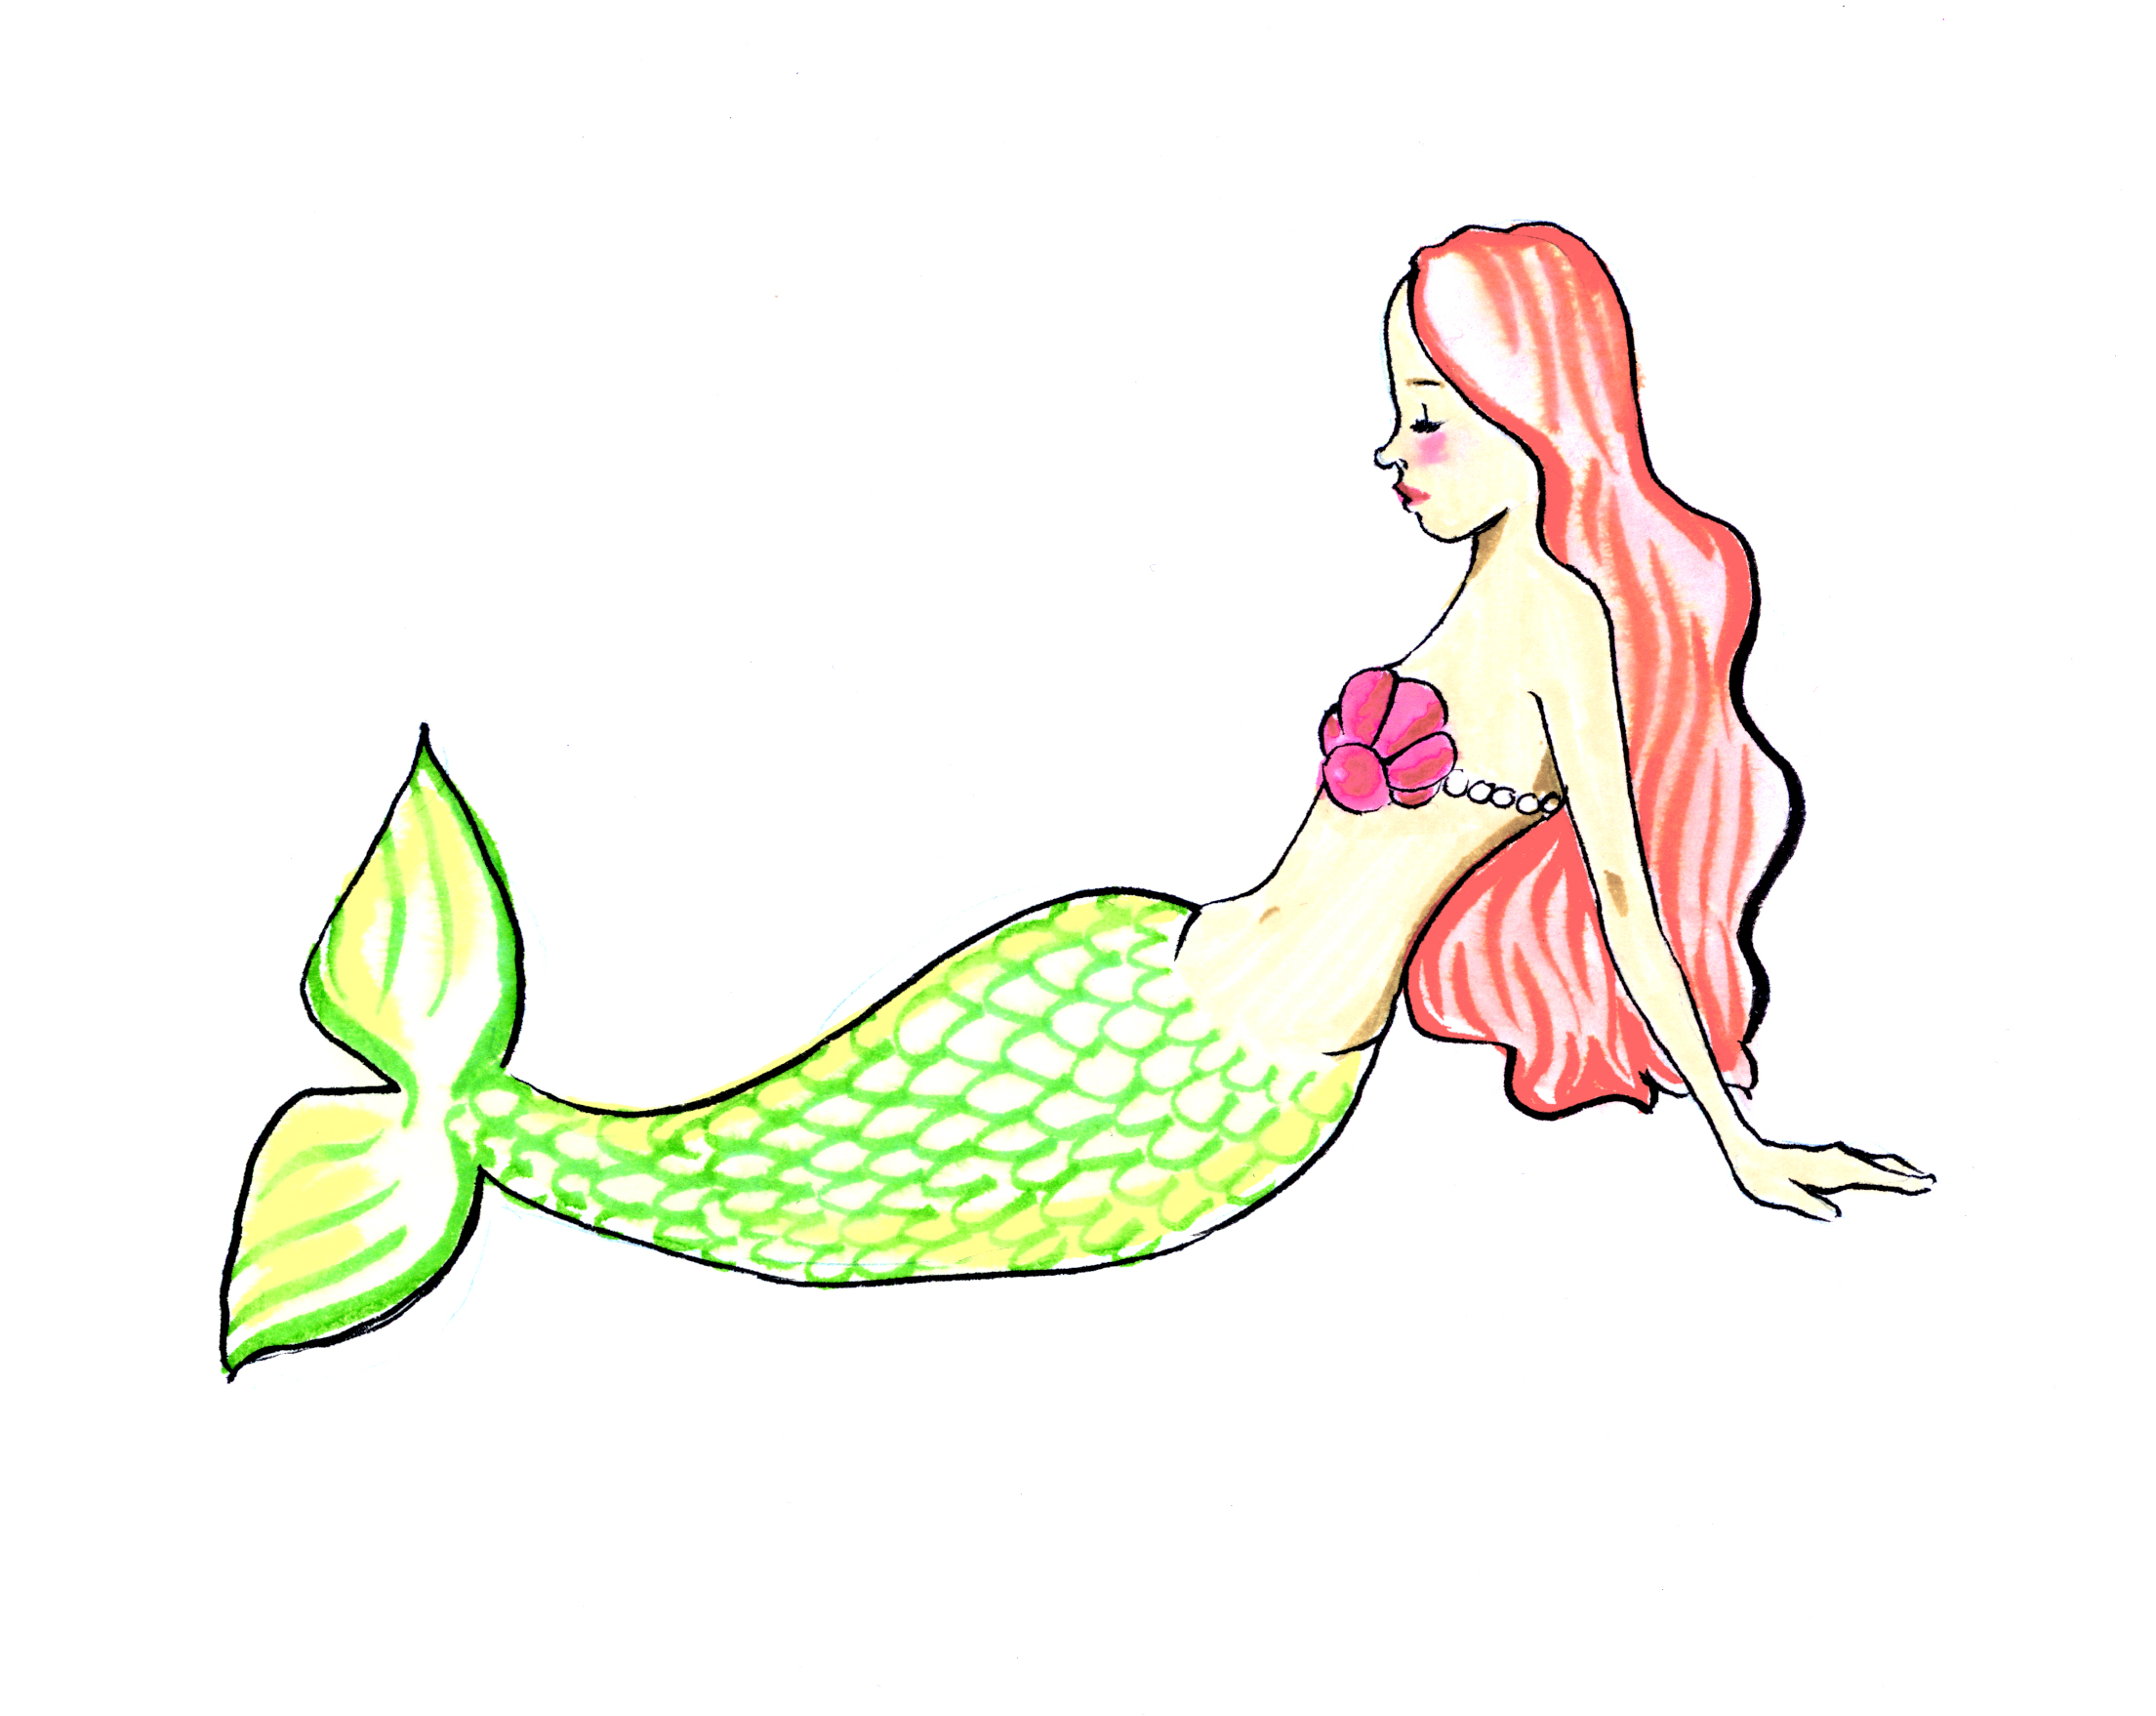 Mermaid Tail Outline   Clipart Panda   Free Clipart Images